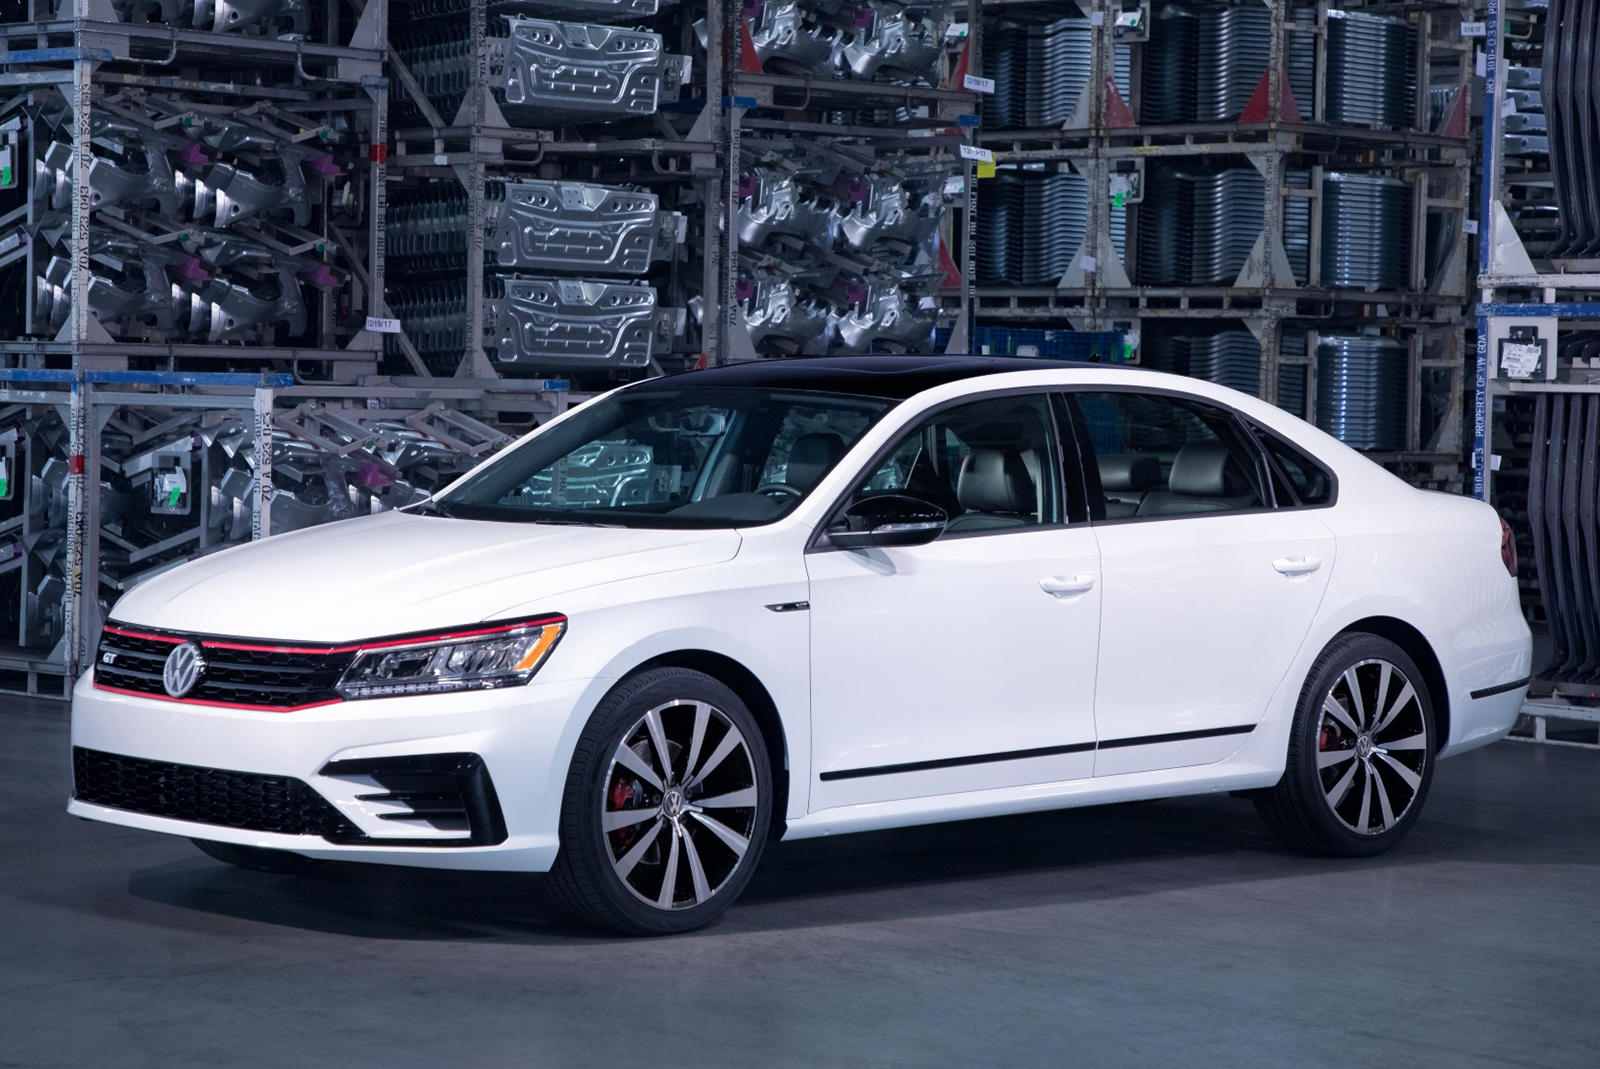 The V6-Powered Volkswagen Passat And GT Are Dead For 2019 | CarBuzz